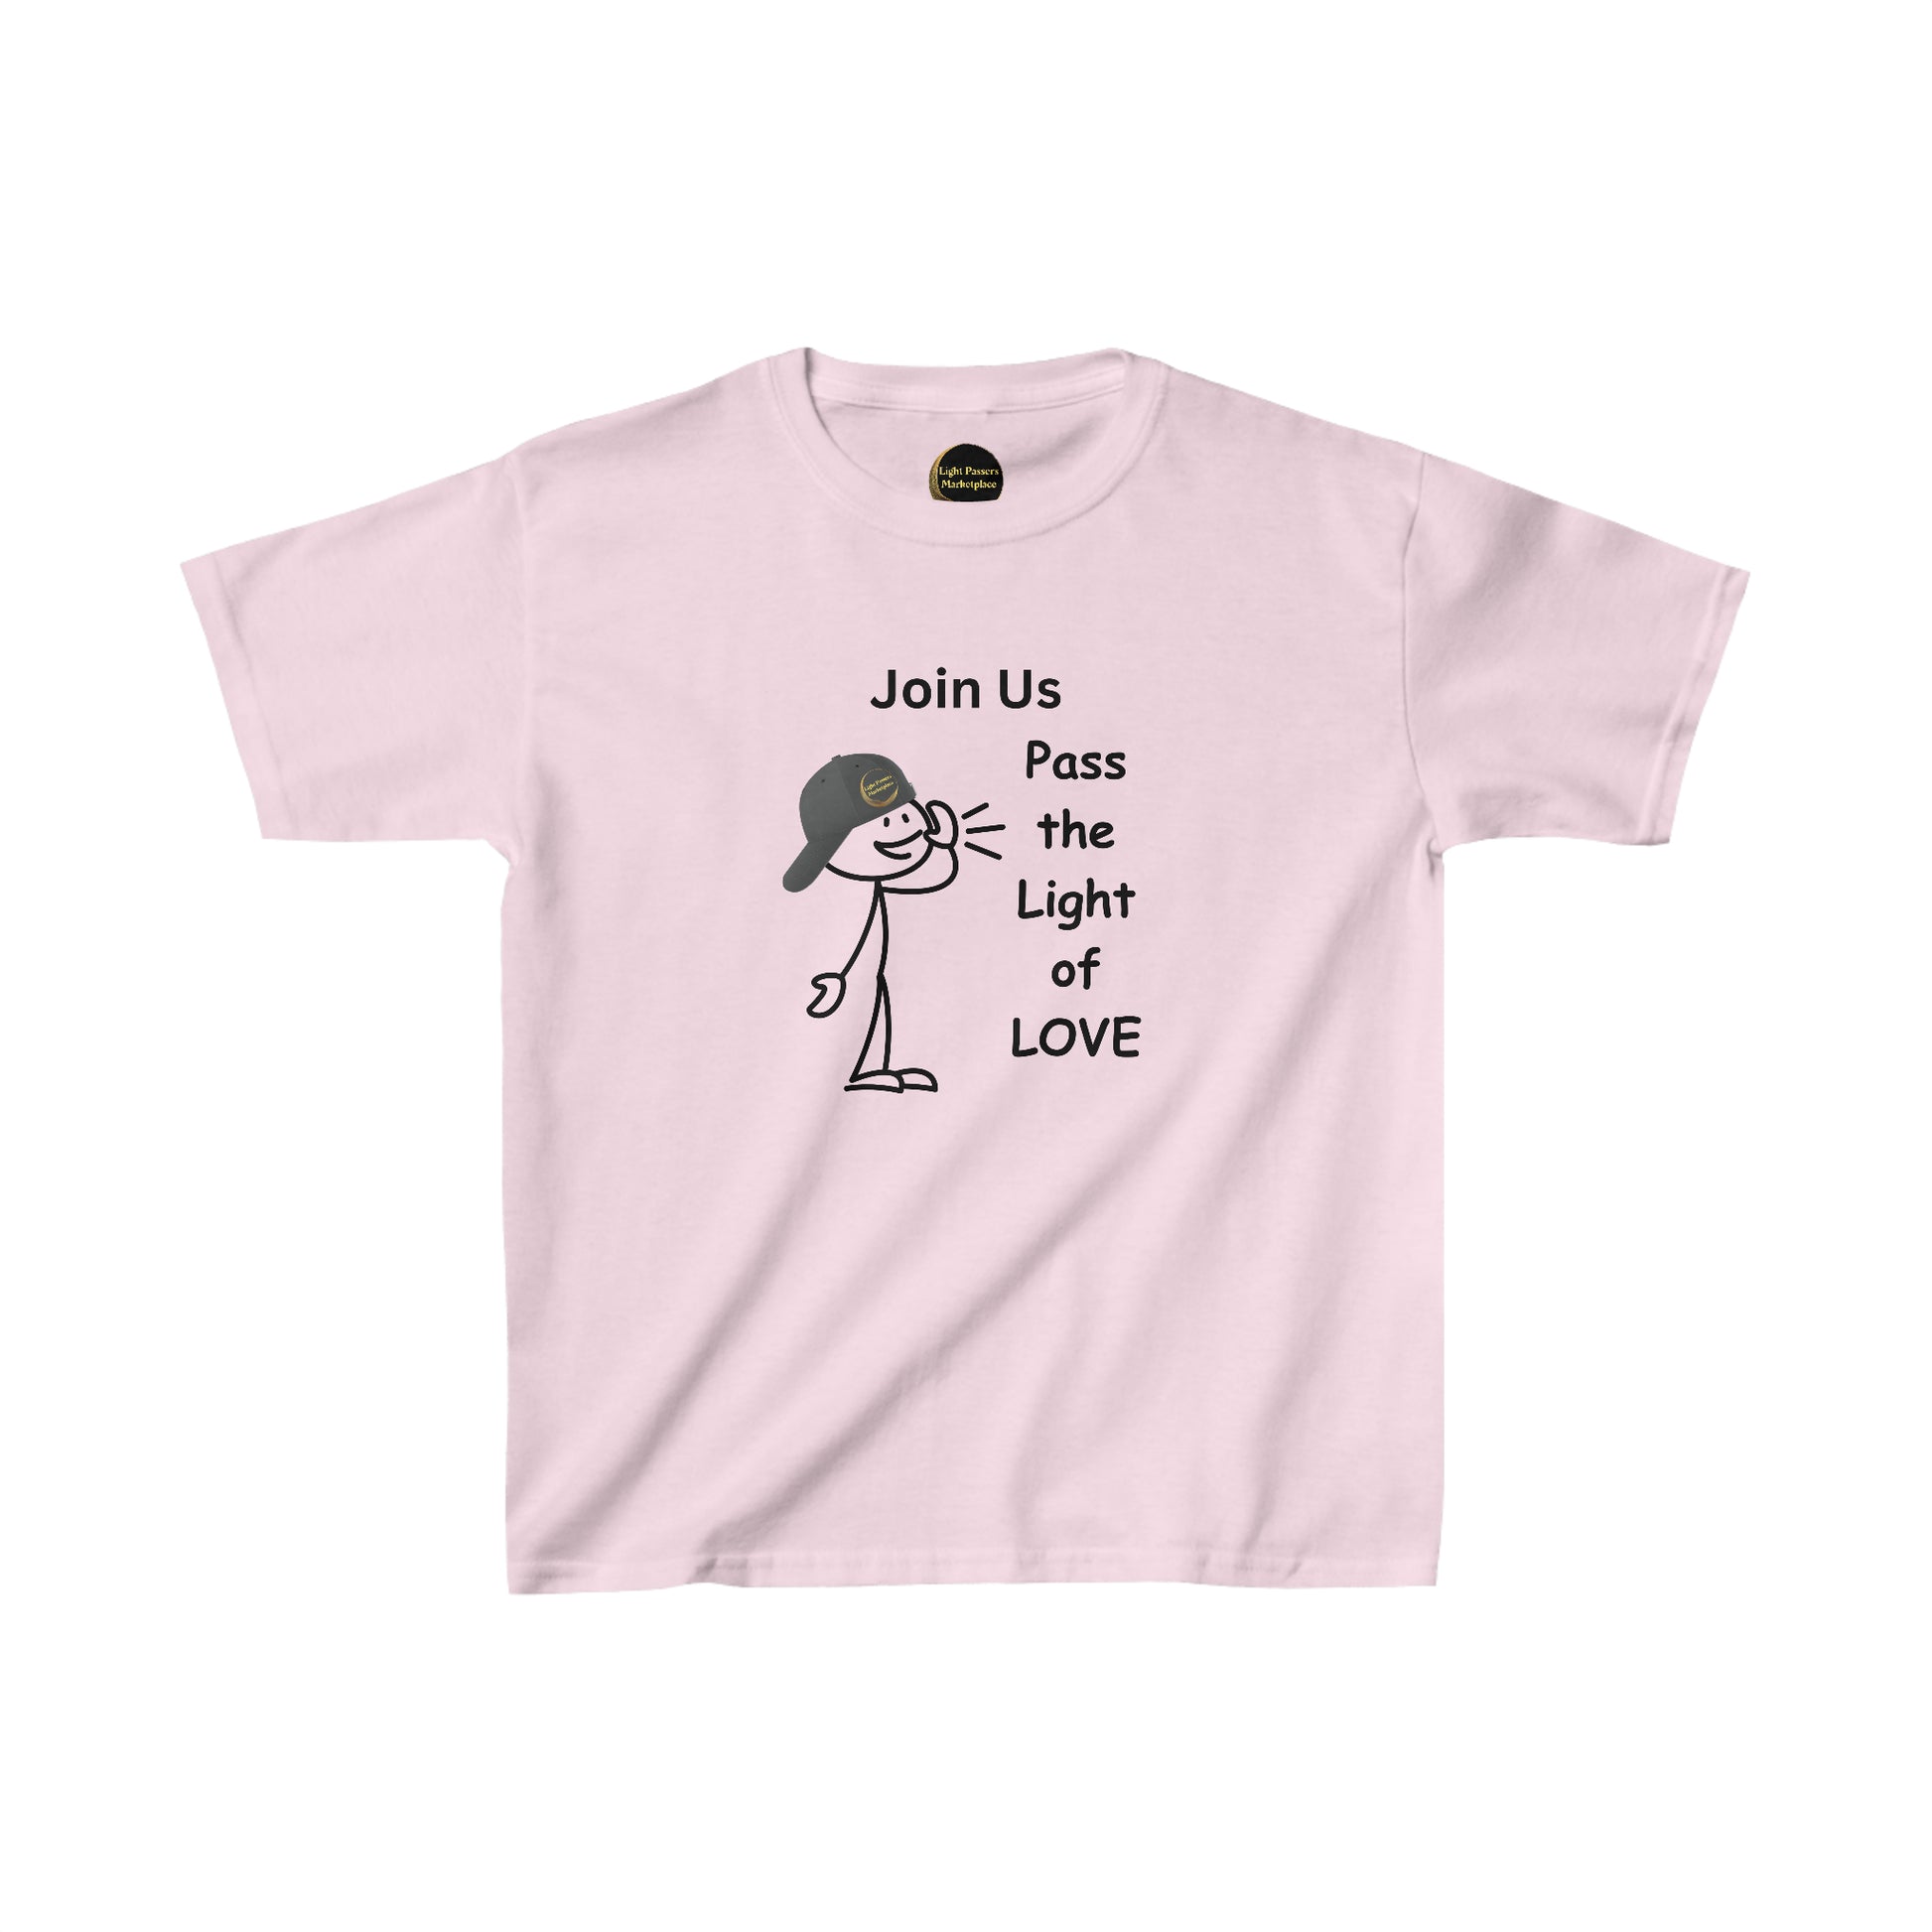 A youth t-shirt featuring a cartoon character with a hat, ideal for daily wear. Made of 100% cotton, with twill tape on shoulders for durability and ribbed collar for curl resistance.